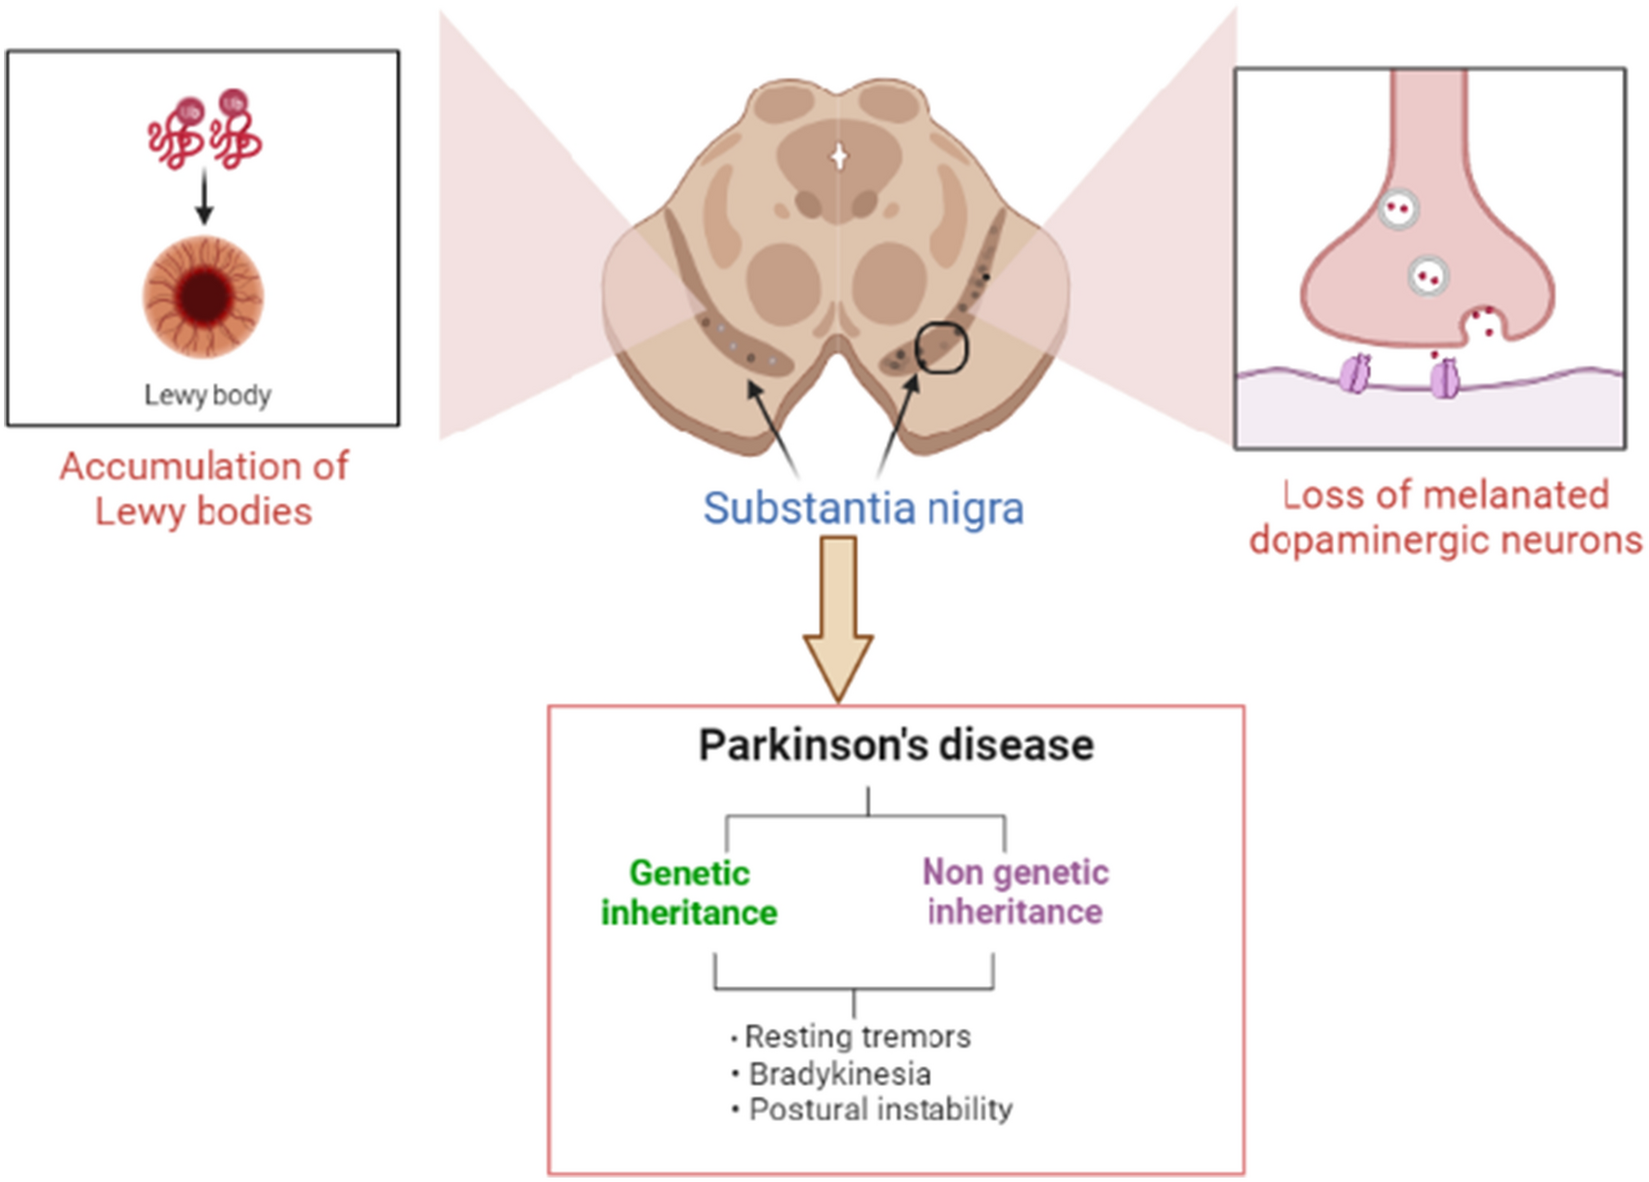 Role of GABA pathway in motor and non-motor symptoms in Parkinson's disease: a bidirectional circuit